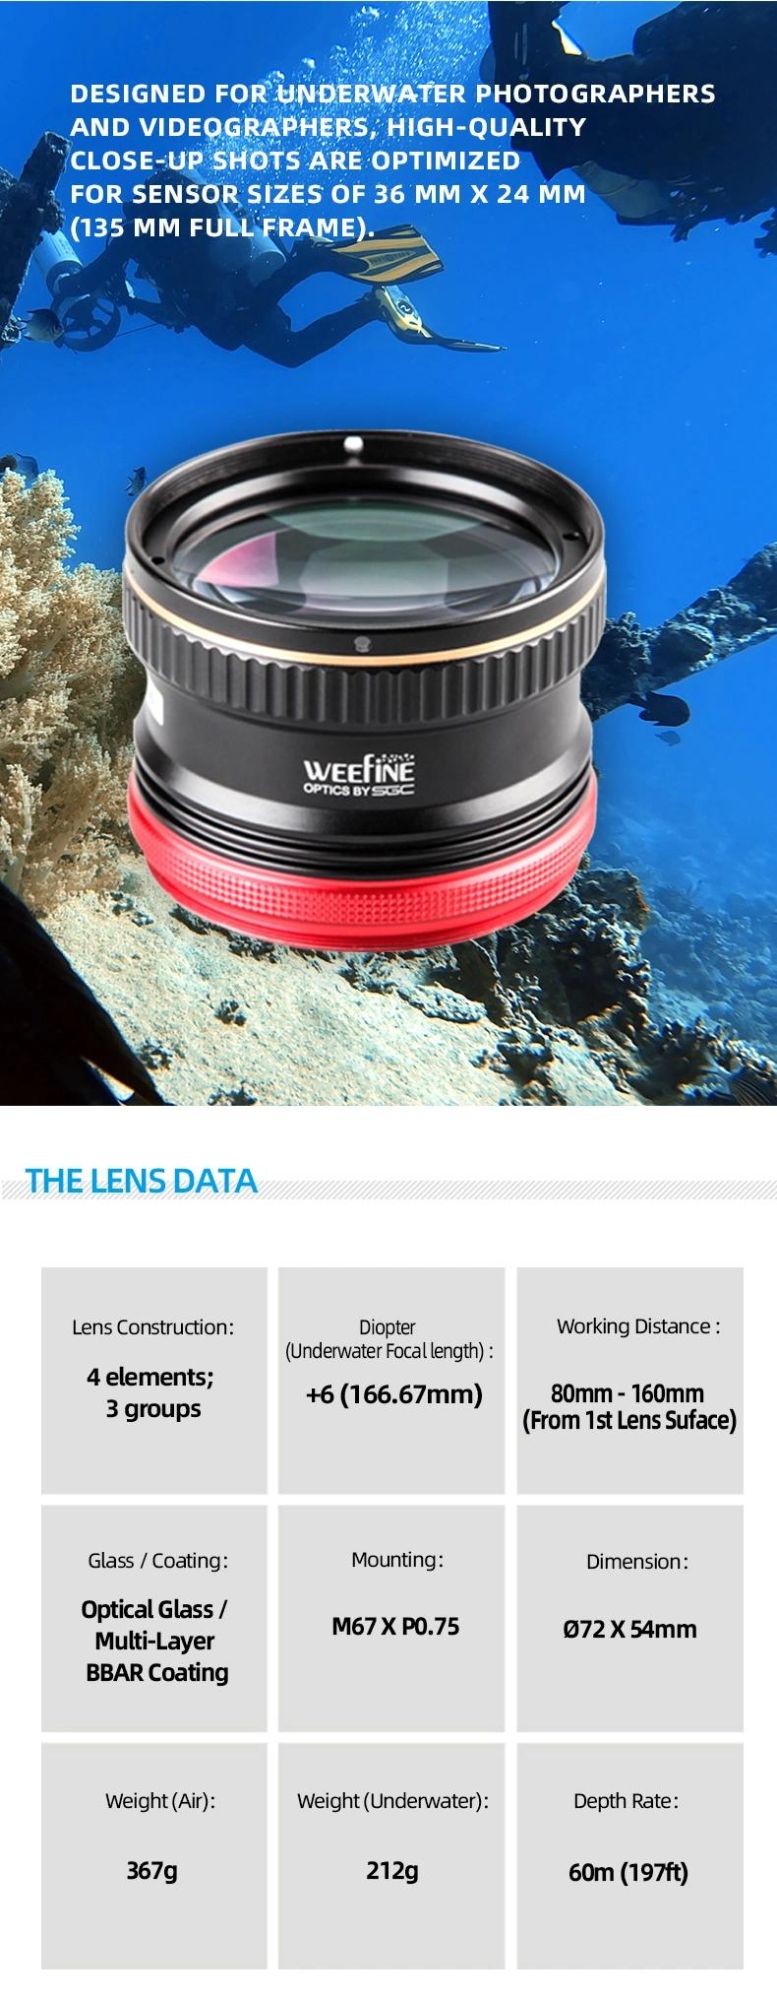 Weefine Optical Diving Lens for Shooting Close-up Images of Fish, Corals, Textures